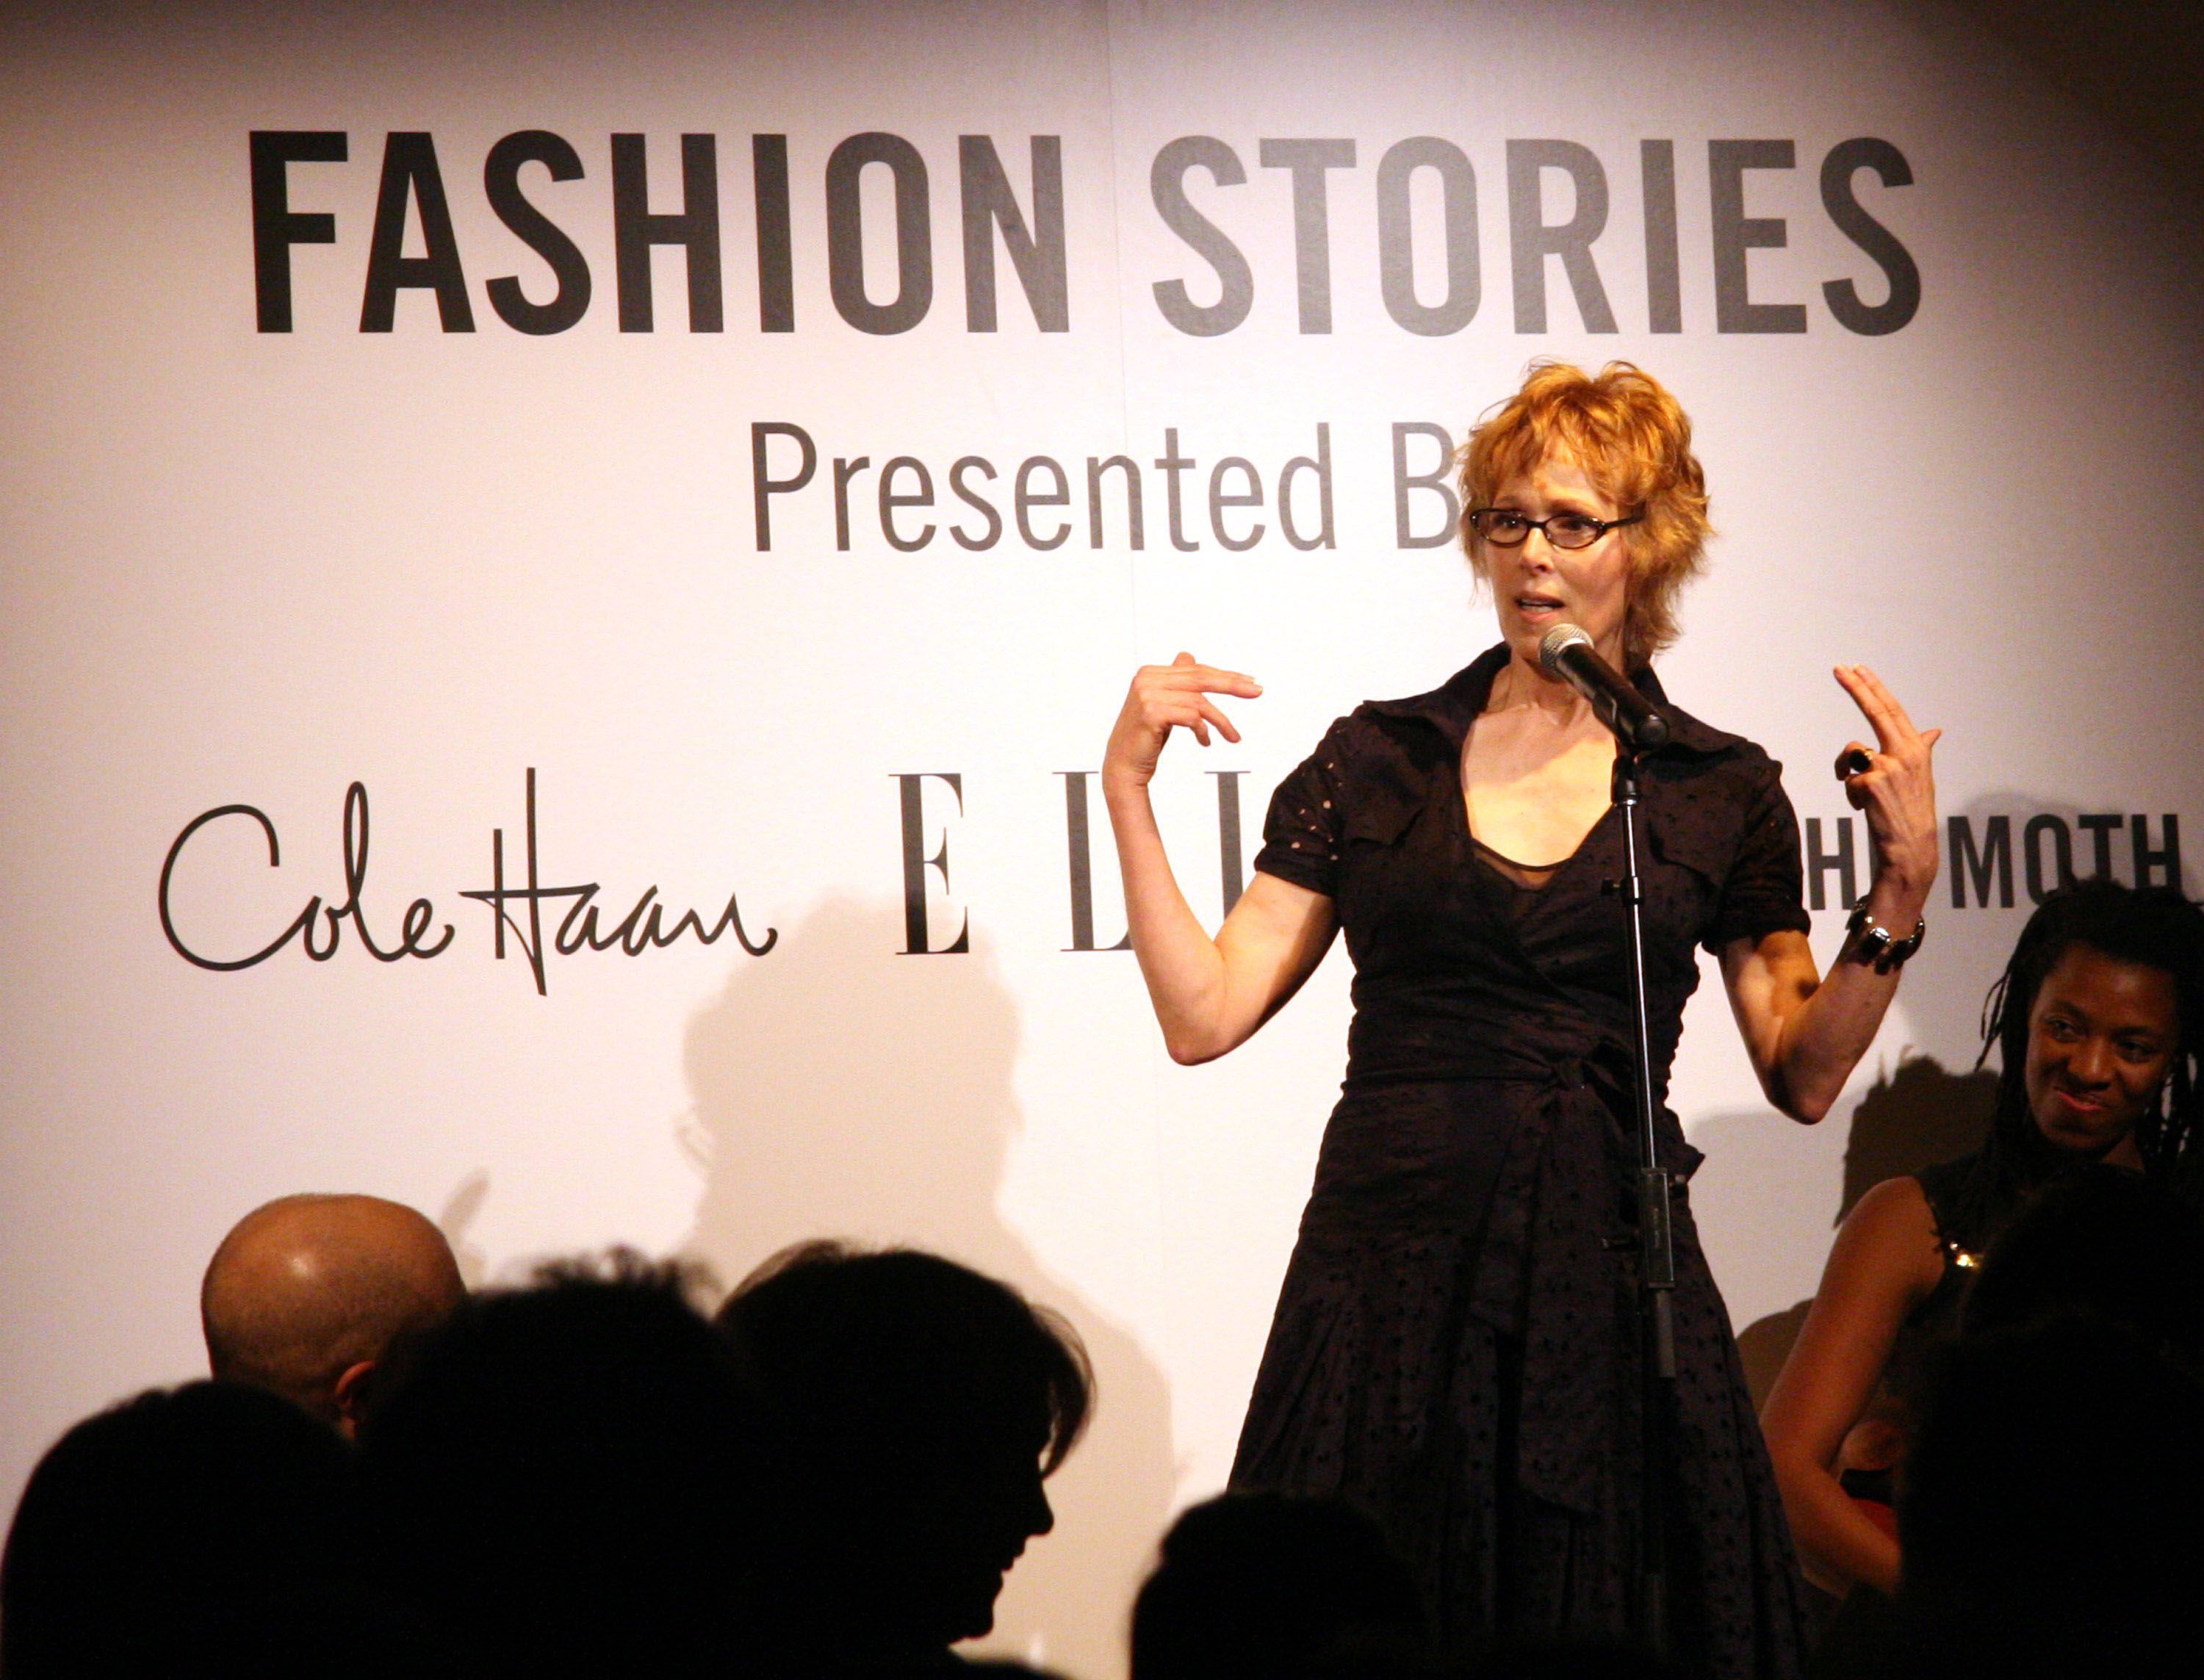 E. Jean Carroll during <em>Elle</em> Magazine Party - September 20, 2006 at 137 West 26th. St in New York City, New York, United States. (Johnny Nunez—WireImage)